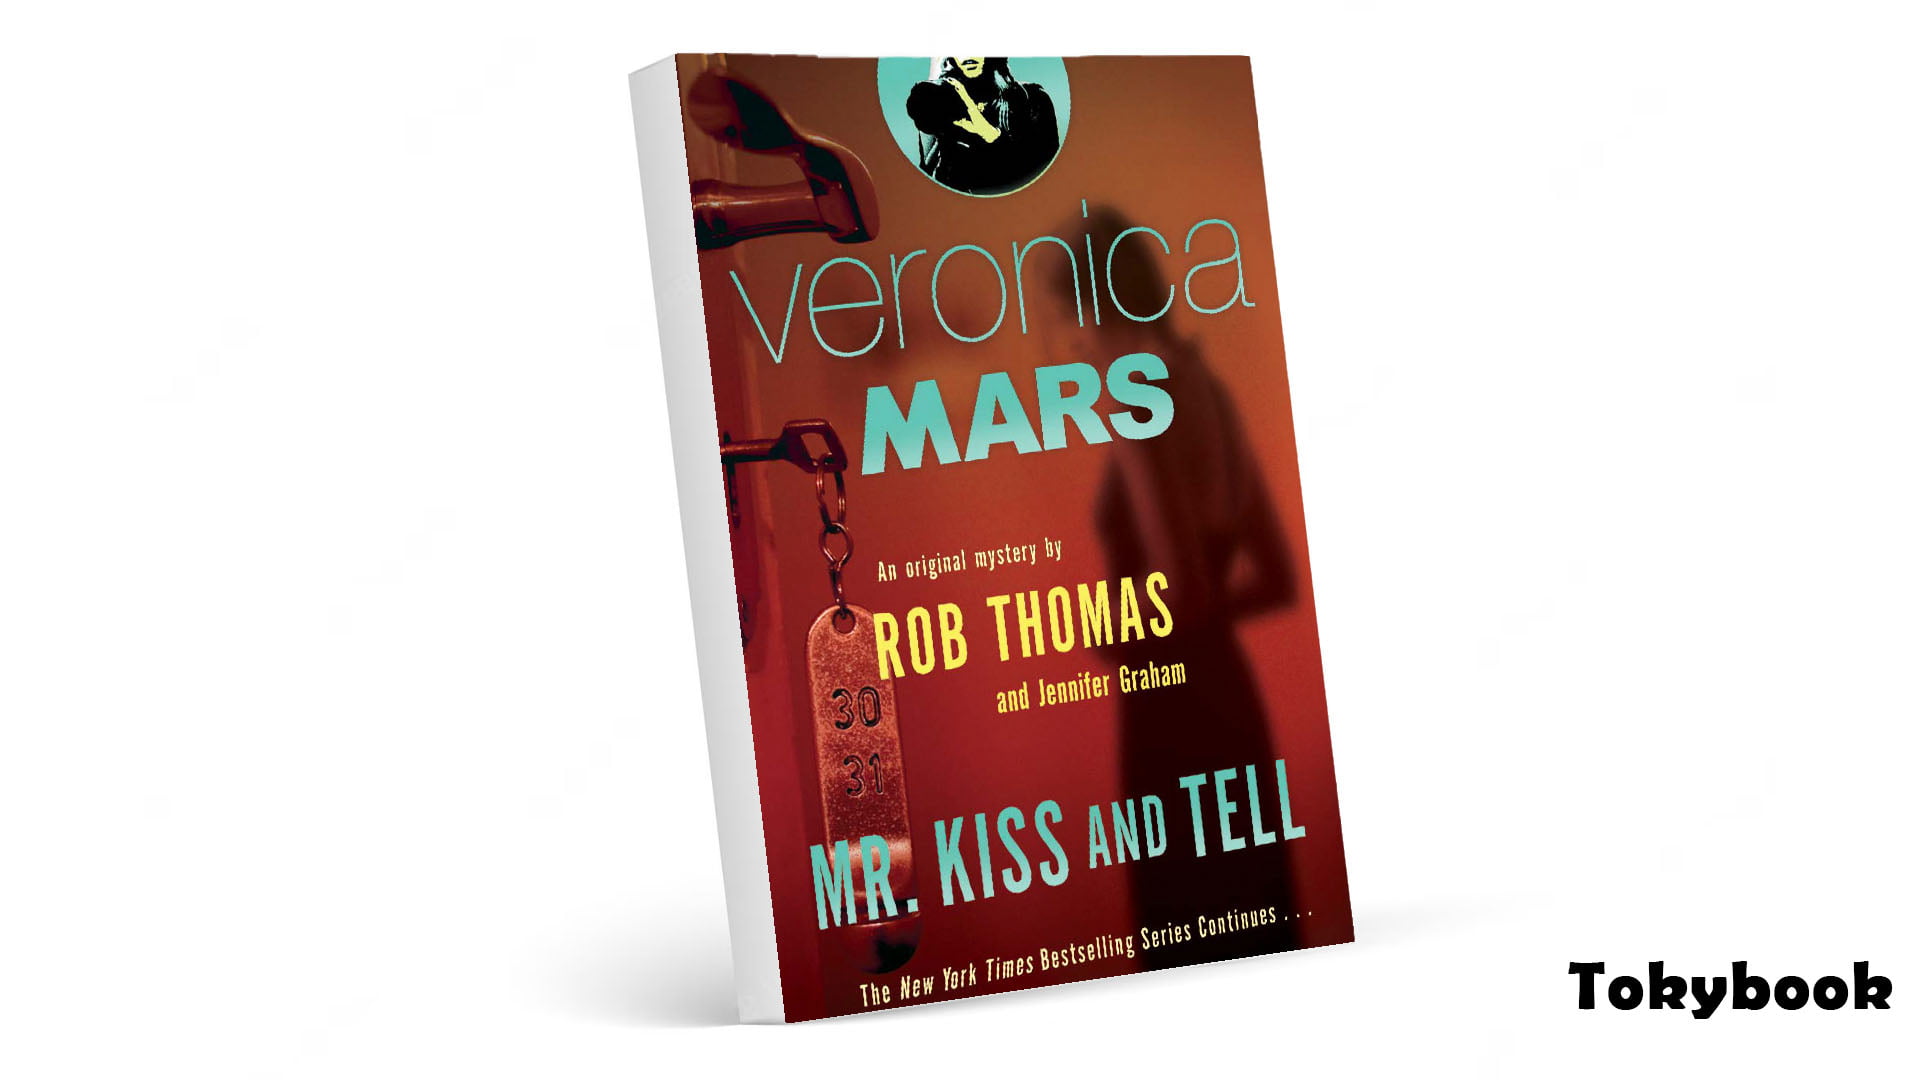 Veronica Mars-Mr. Kiss and Tell